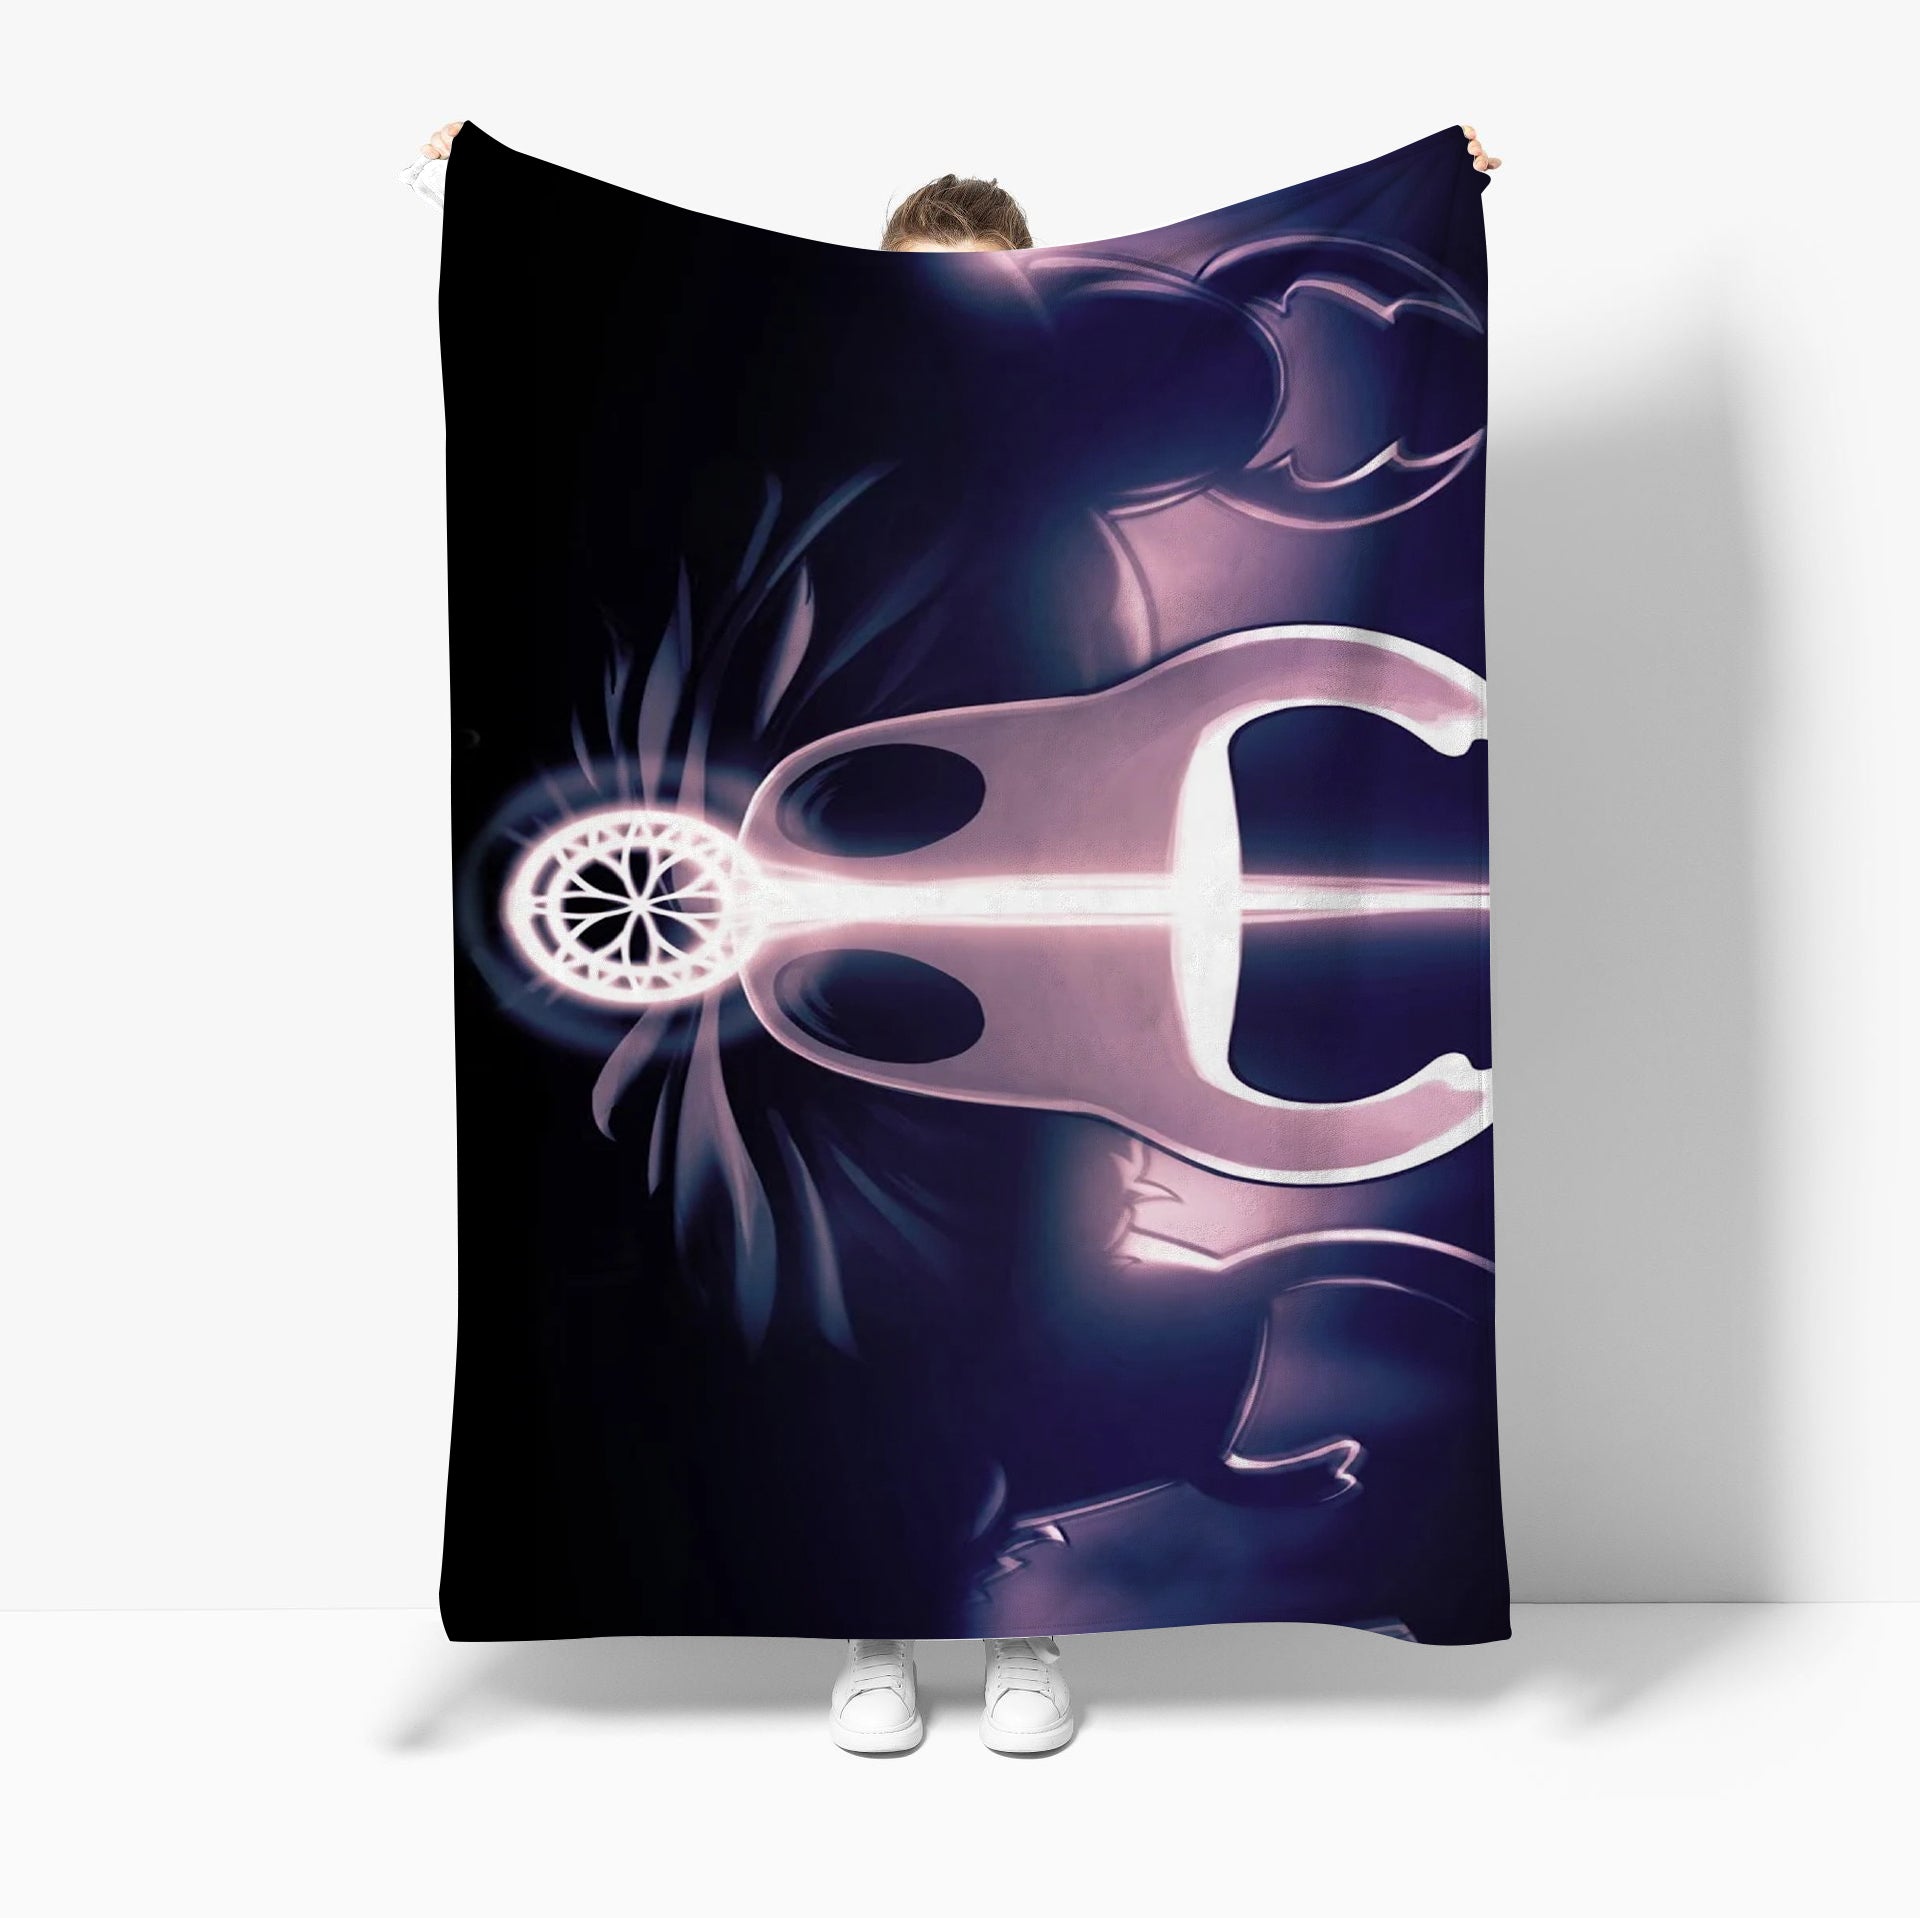 The Hollow Knight 3D Printed Plush Blanket Flannel Fleece Throw Warm Gift for Kids Adults Home Office